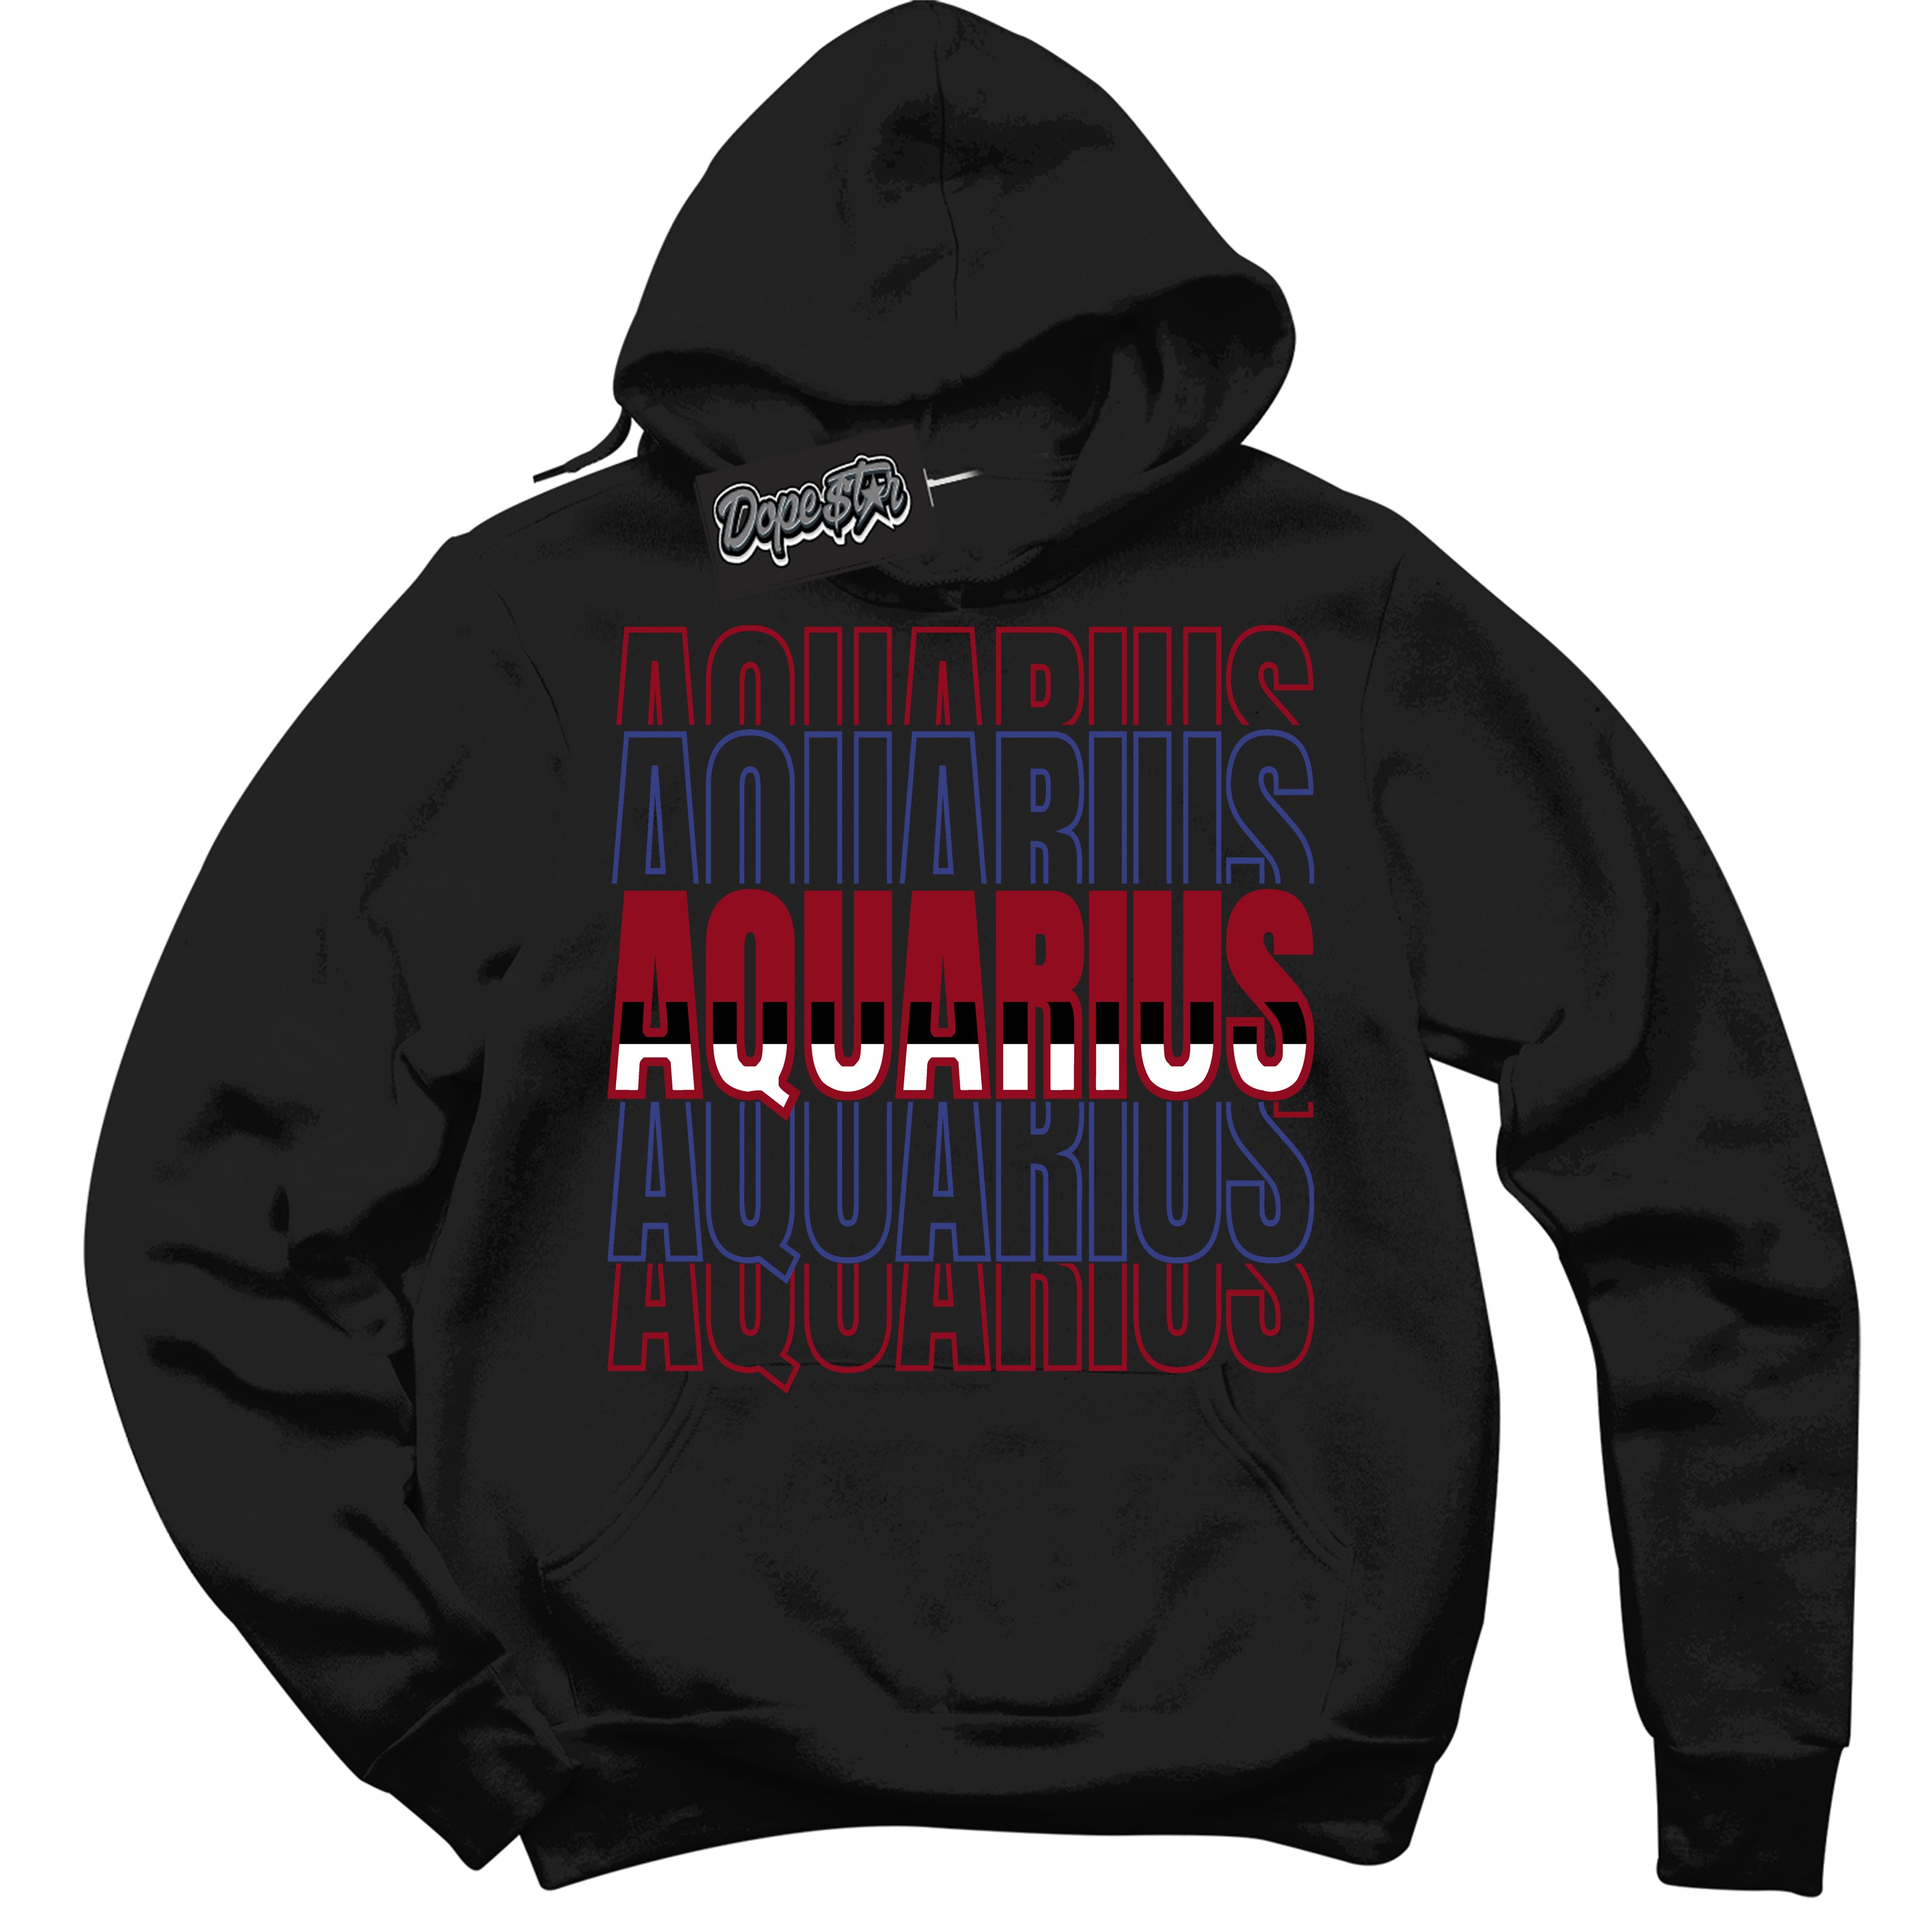 Cool Black Hoodie with “ Aquarius ”  design that Perfectly Matches Playoffs 8s Sneakers.